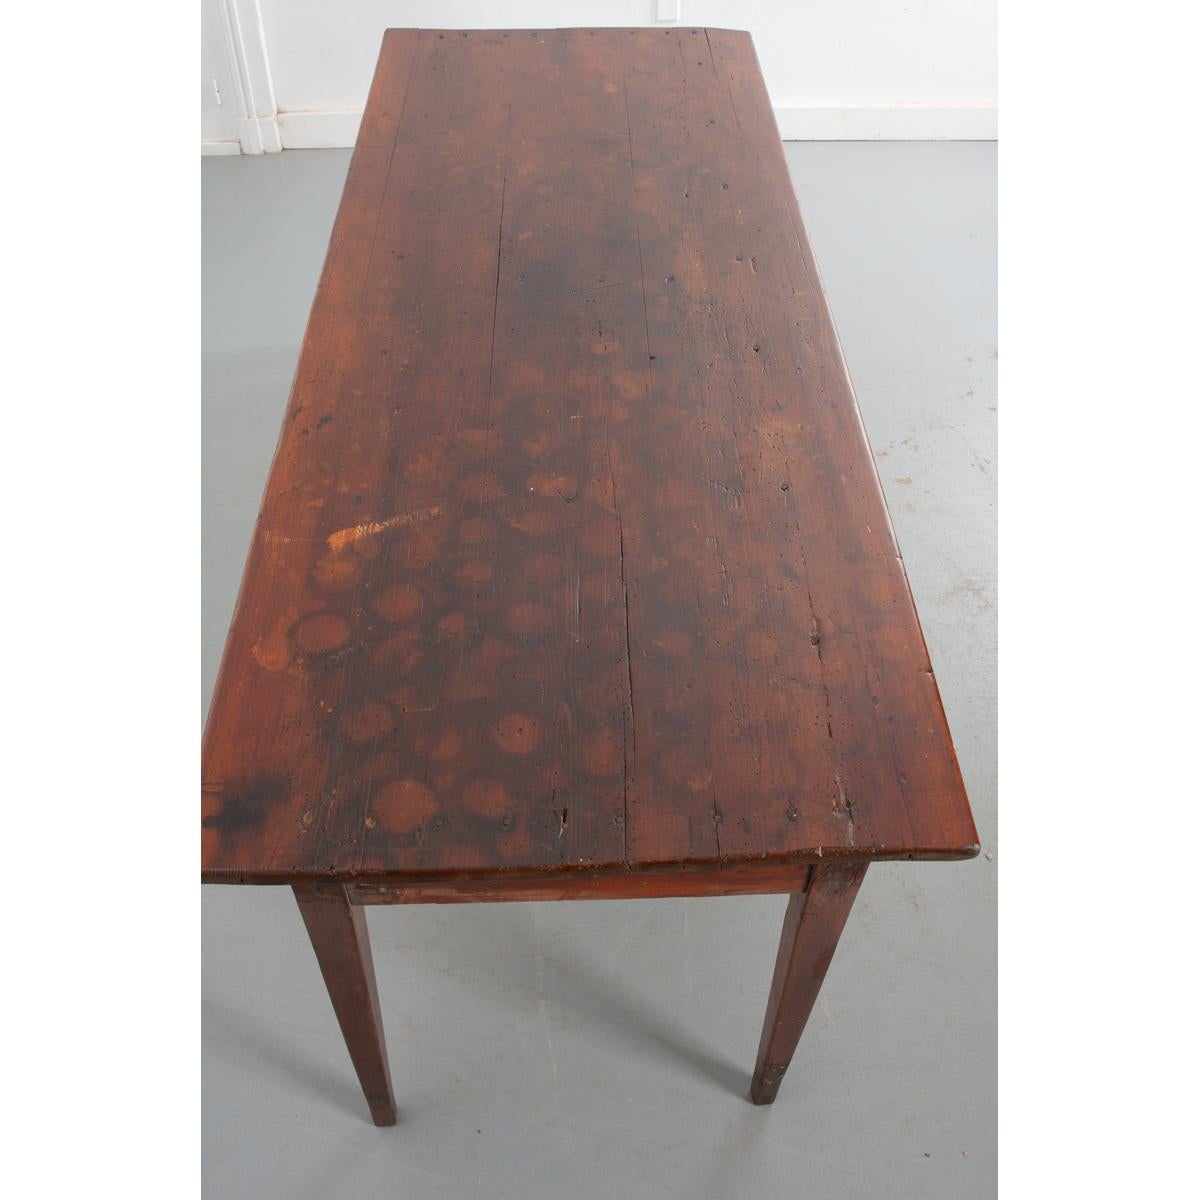 This charming 19th century French farm table has a wonderful patina. The sturdy pine top bears the marks of many lives that only add to the antique quality of the table. Measuring over 6 feet long, approximately 10-12 places can be set depending on